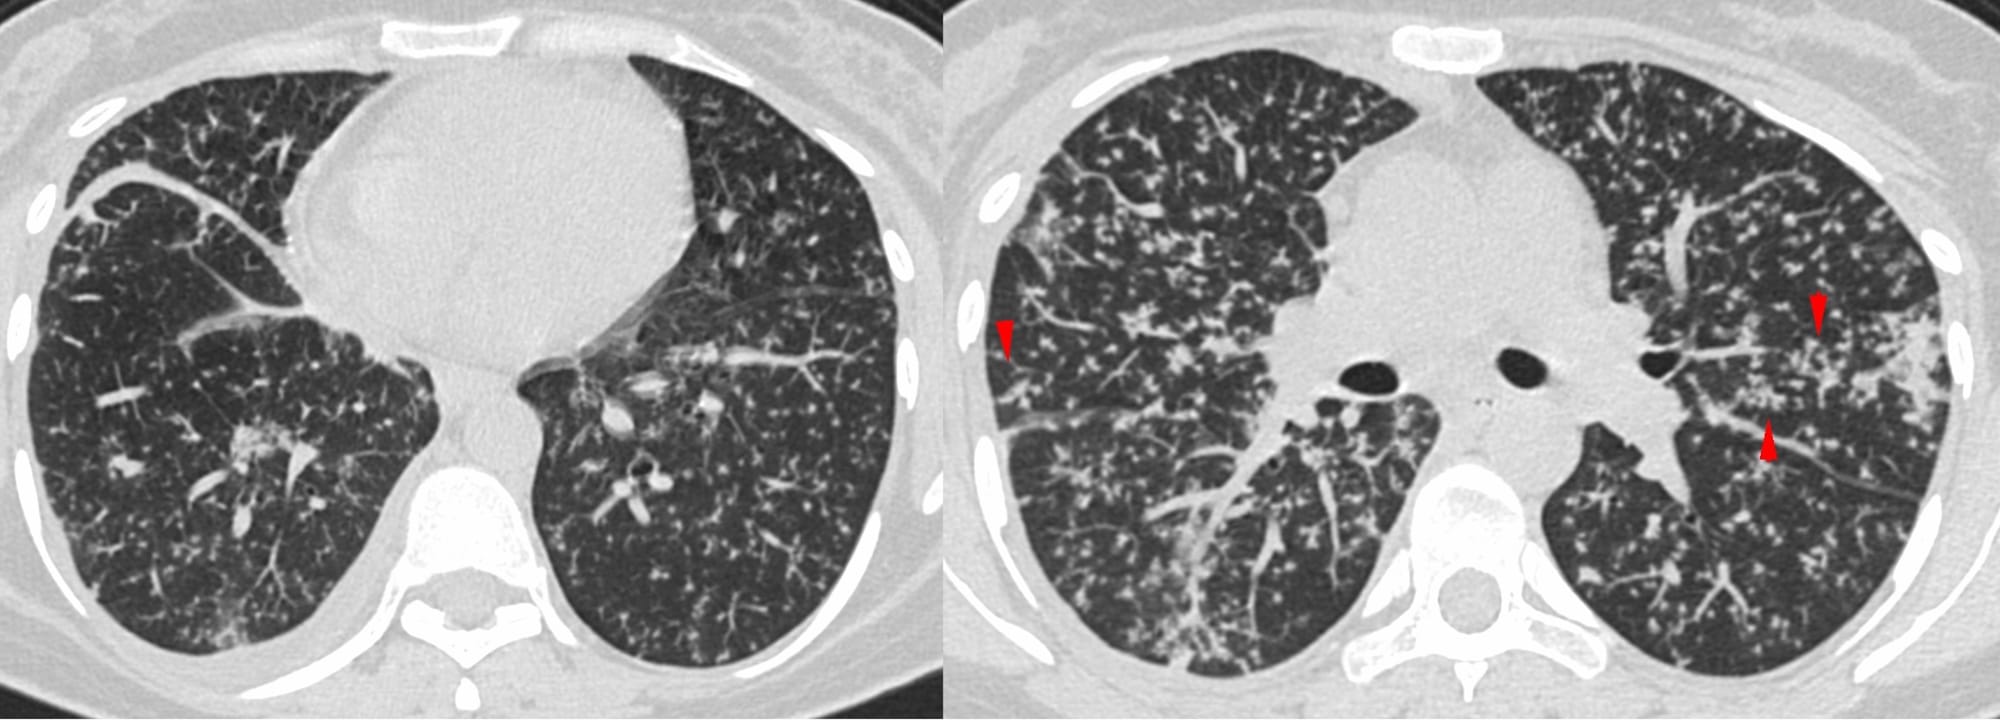 Case 101: When the Pattern of Lung Disease Gives a Clue to the Diagnosis